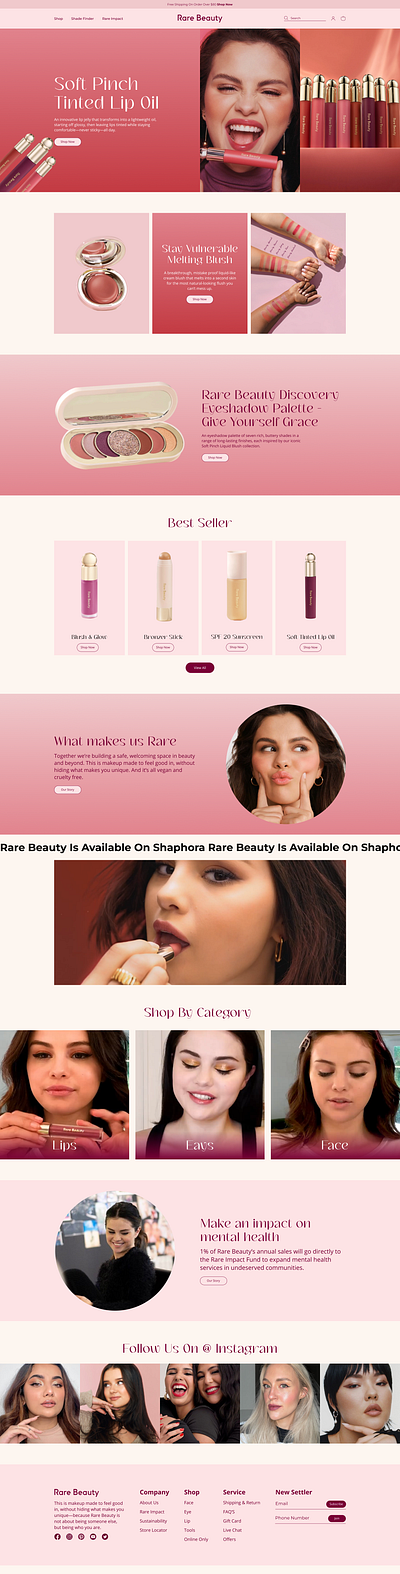 Shopify Ecommerce Website | Rare Beauty Redesign figma figma design landing page photoshop redesign shopify web layout ui web design